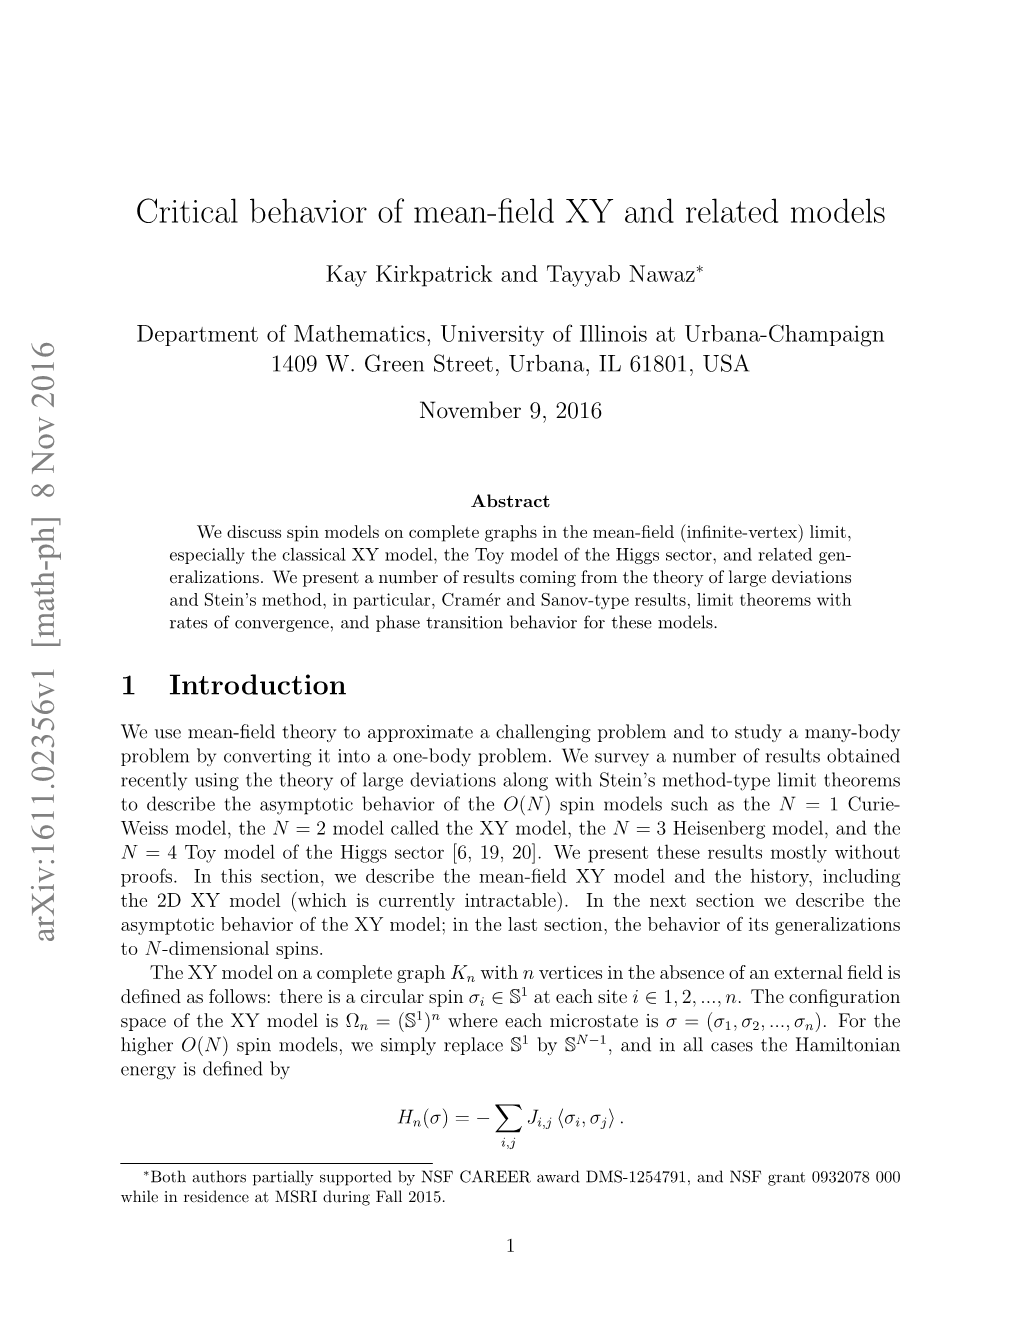 Critical Behavior of Mean-Field XY and Related Models Arxiv:1611.02356V1